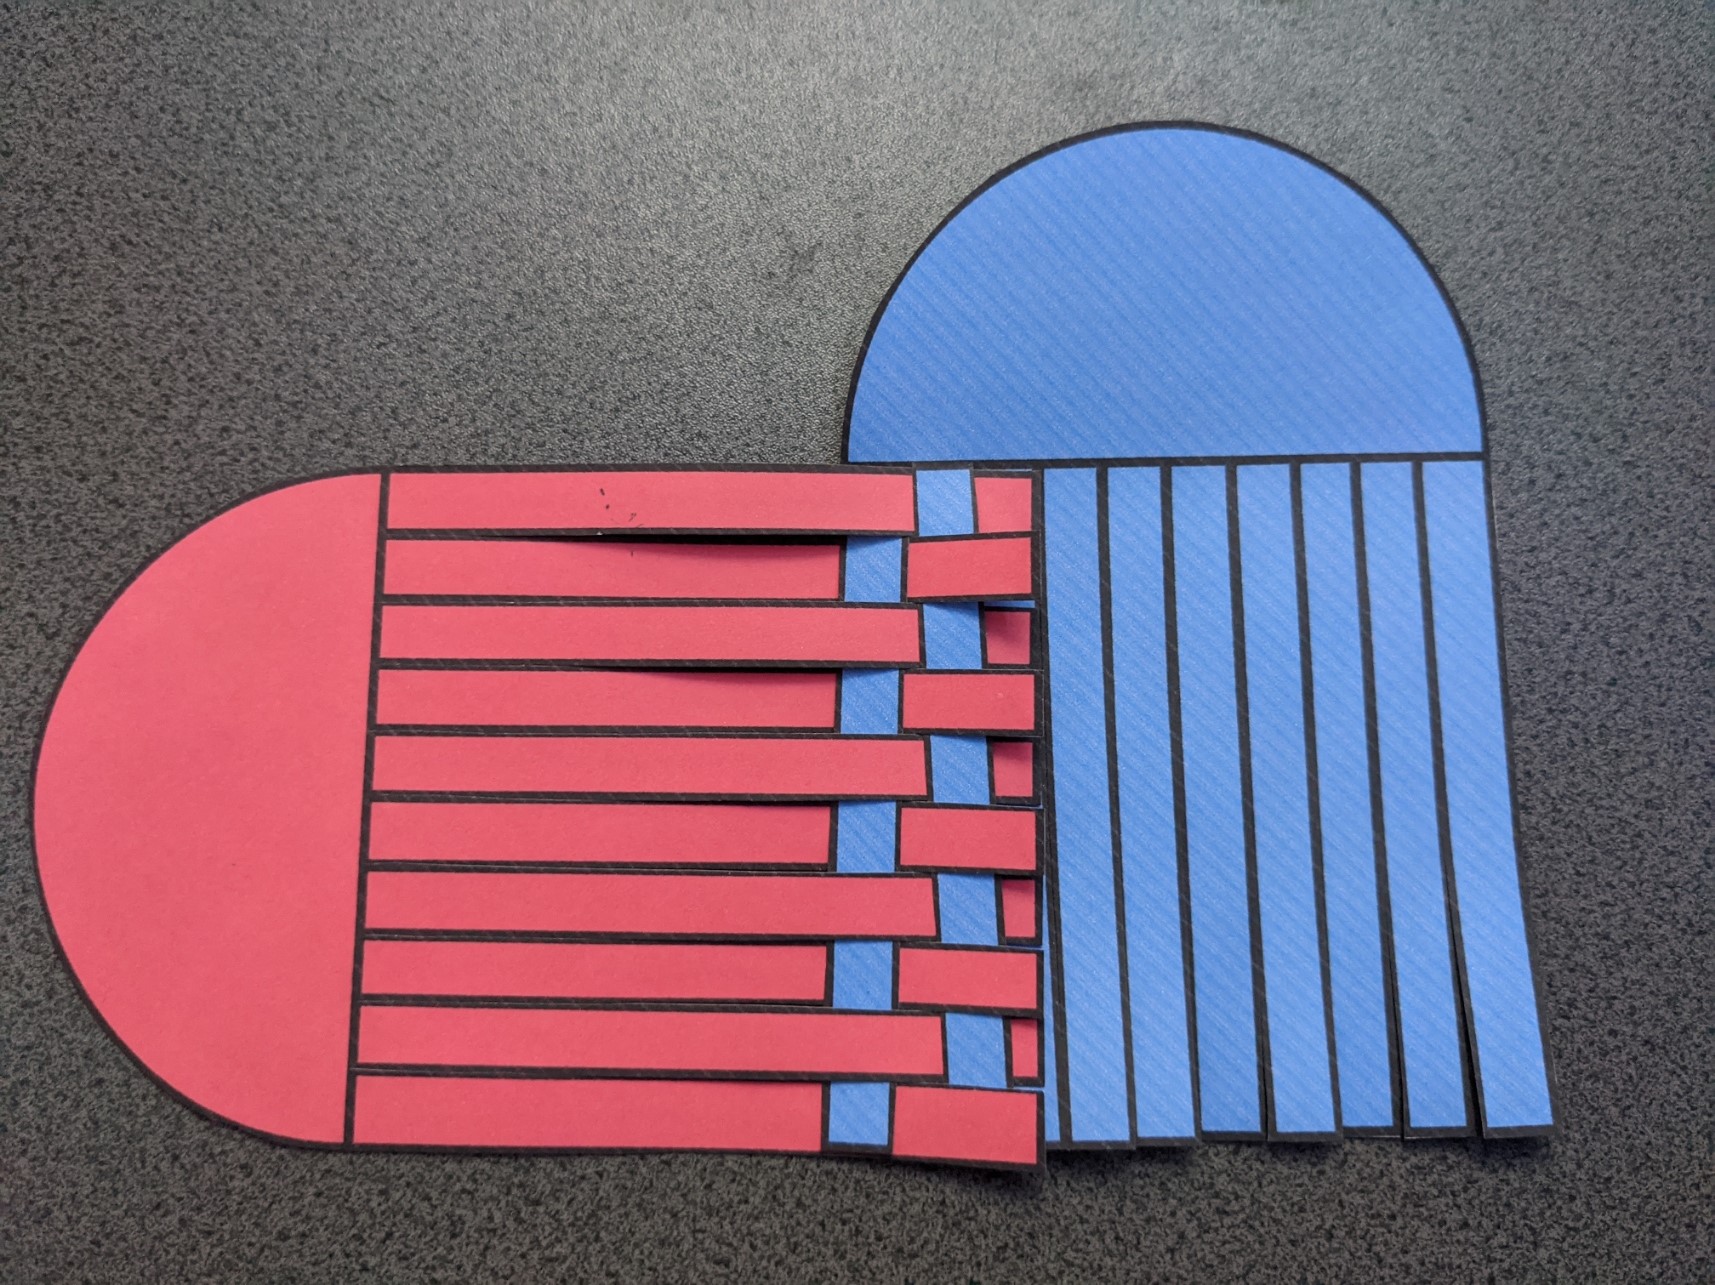 the heart templates after the second blue strand has been woven across the red